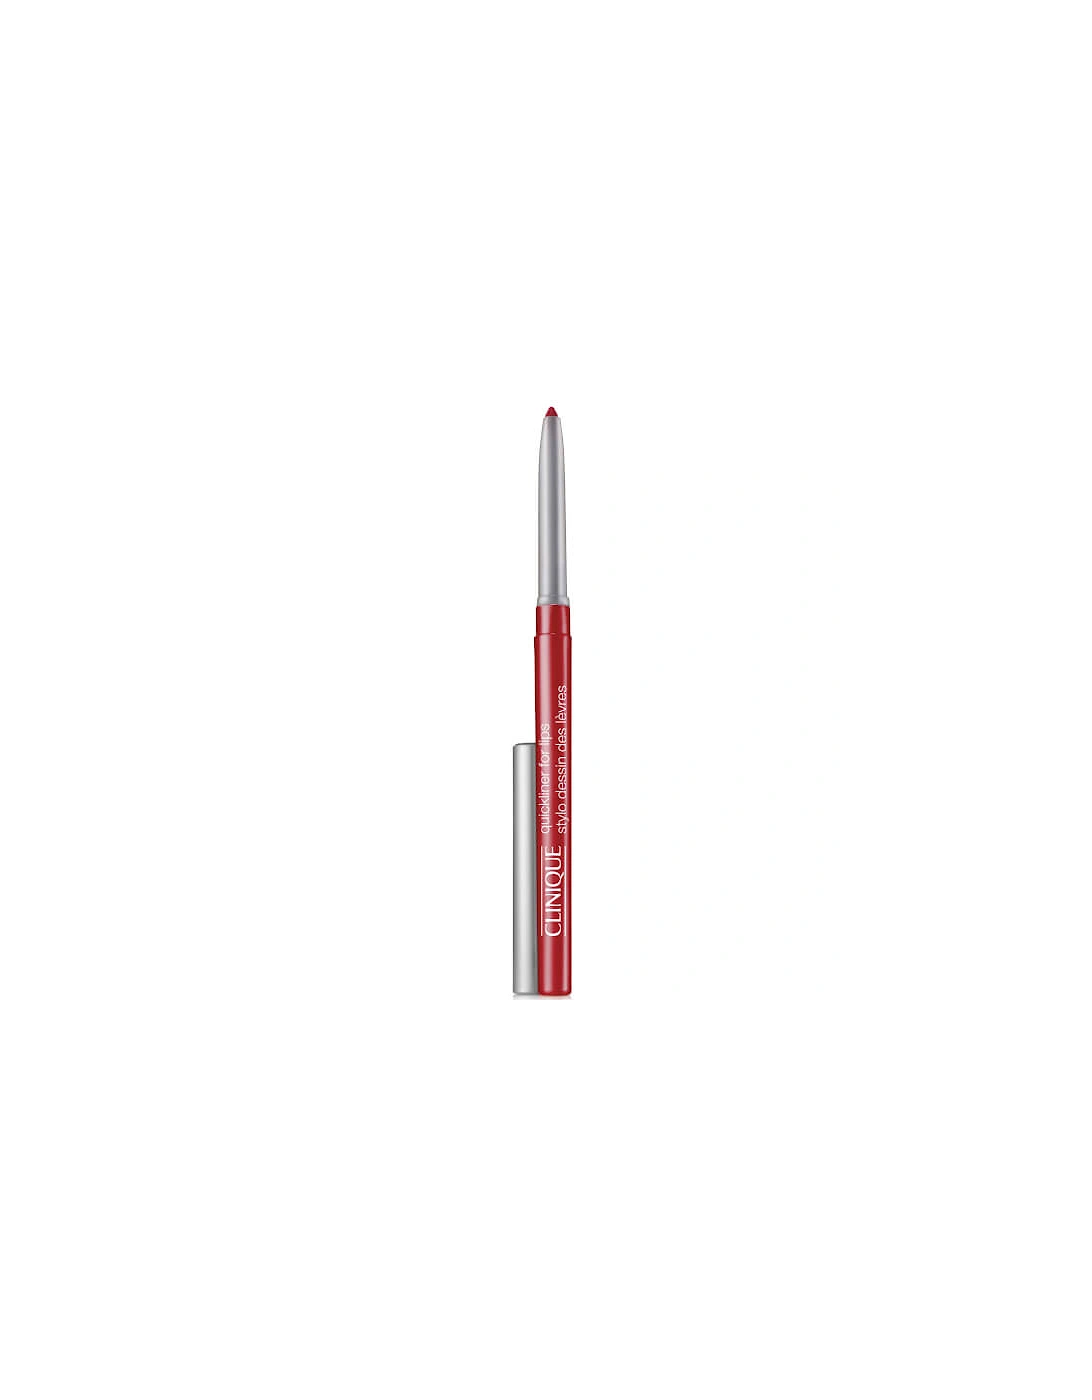 Quickliner for Lips - Intense Cranberry, 2 of 1